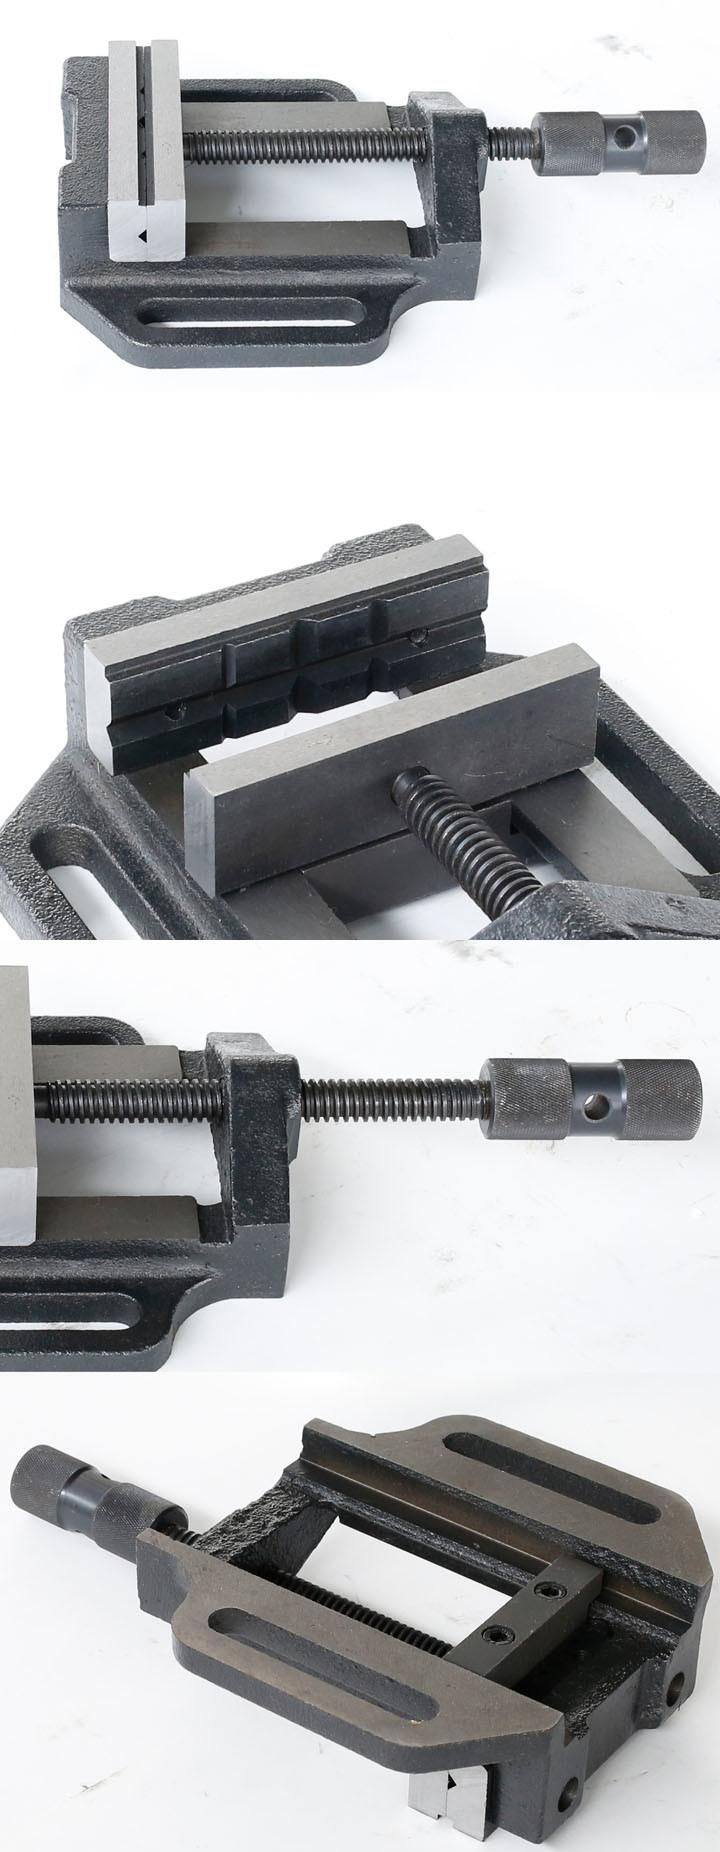 Drill Press Vise with Common T Slot Clamps